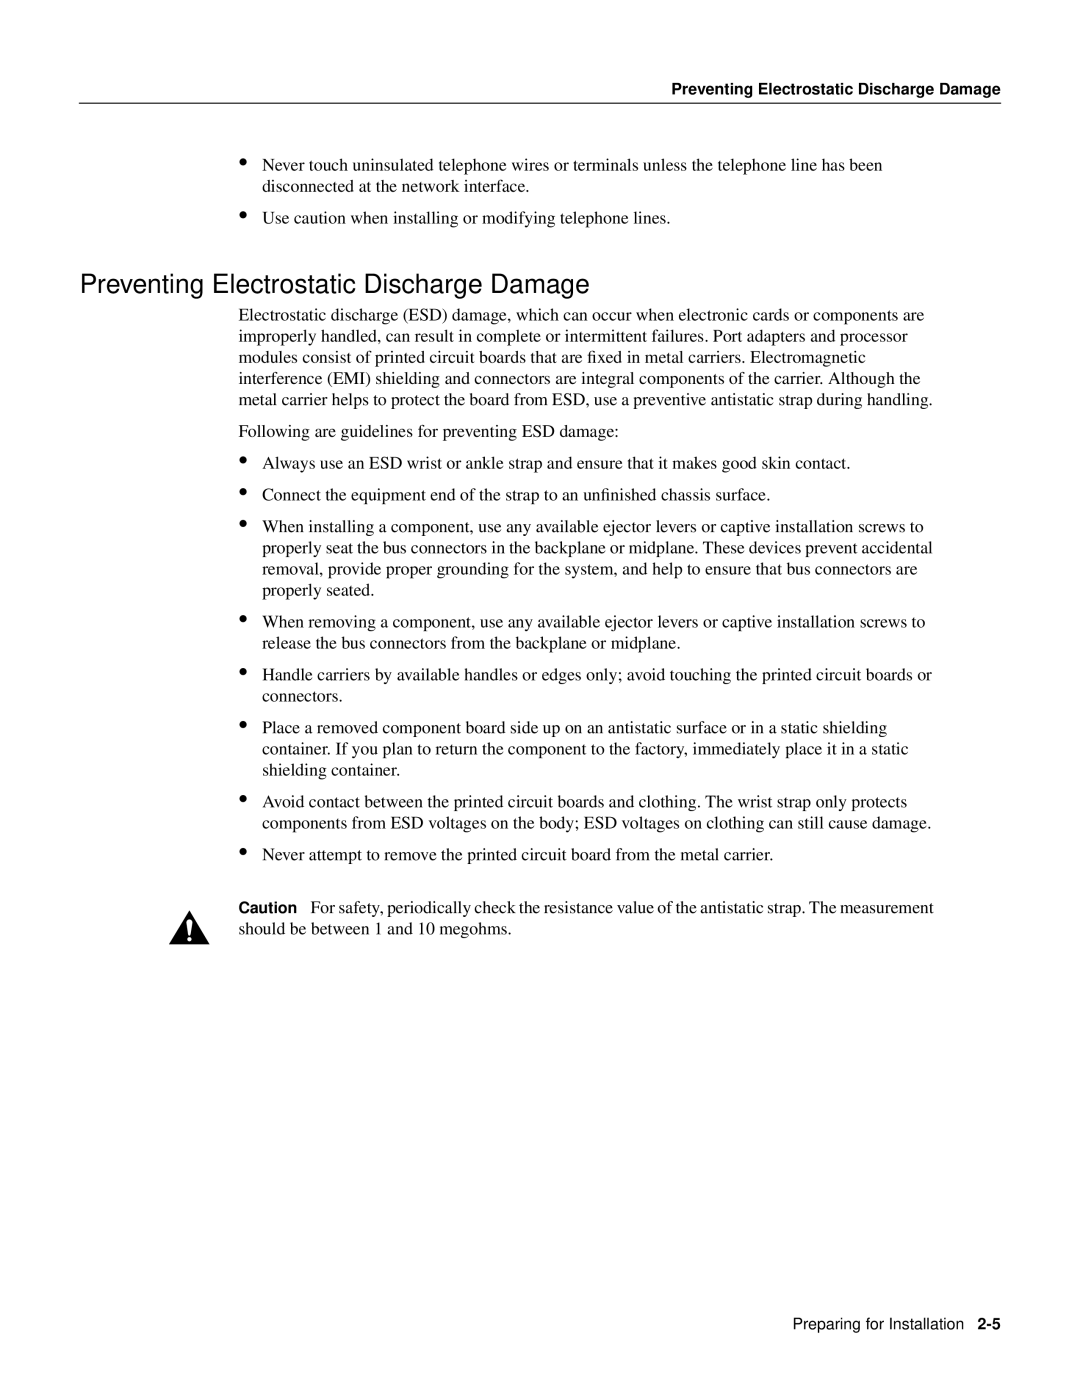 Cisco Systems PA-FE-FX, PA-FE-TX manual Preventing Electrostatic Discharge Damage 